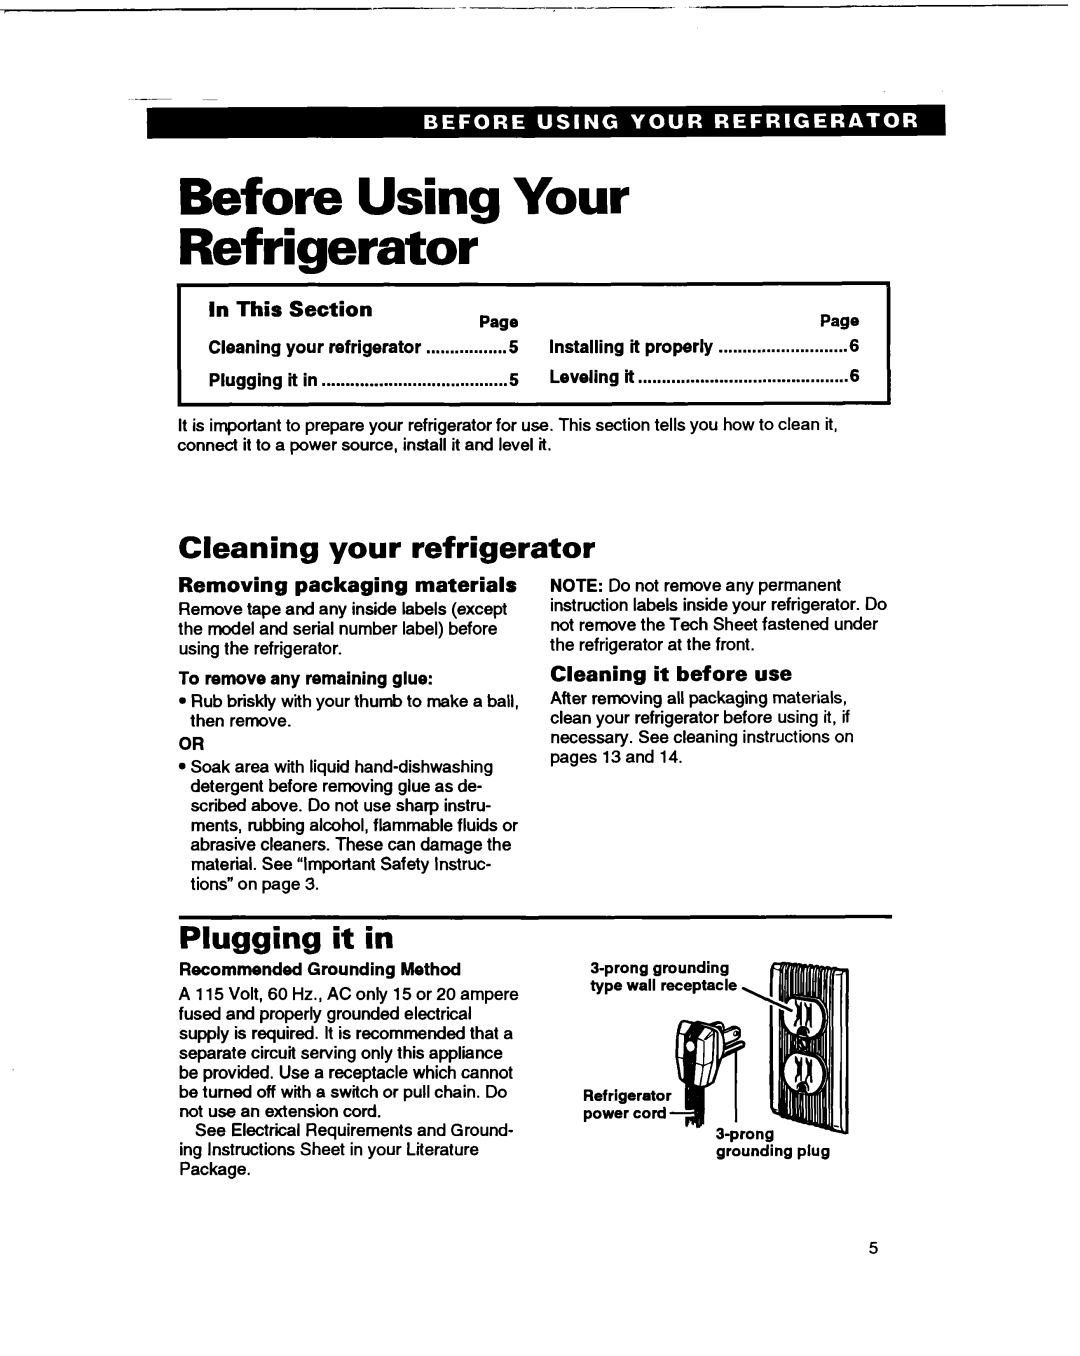 Whirlpool ETl4HJ, ET14GK Before Using Your Refrigerator, Cleaning your refrigerator, Plugging it in, Section, In This 